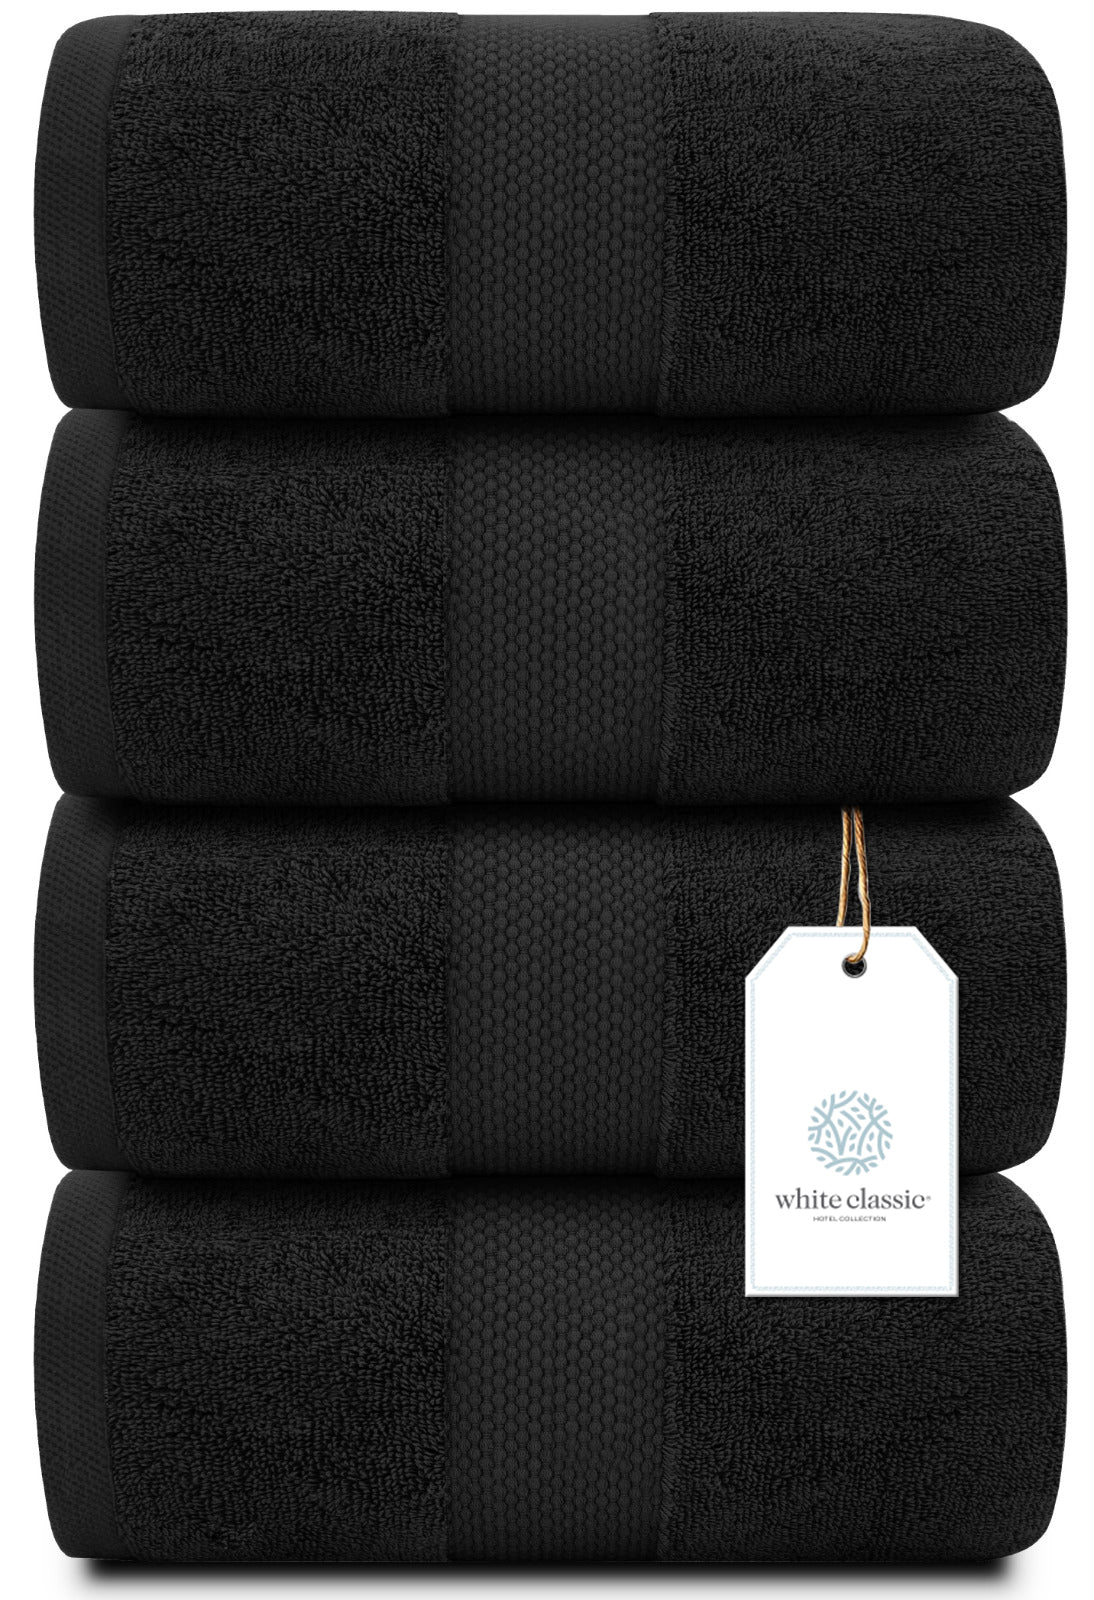 Hotel Collection Luxury Bath Towels | 27x54 | 4 Pack